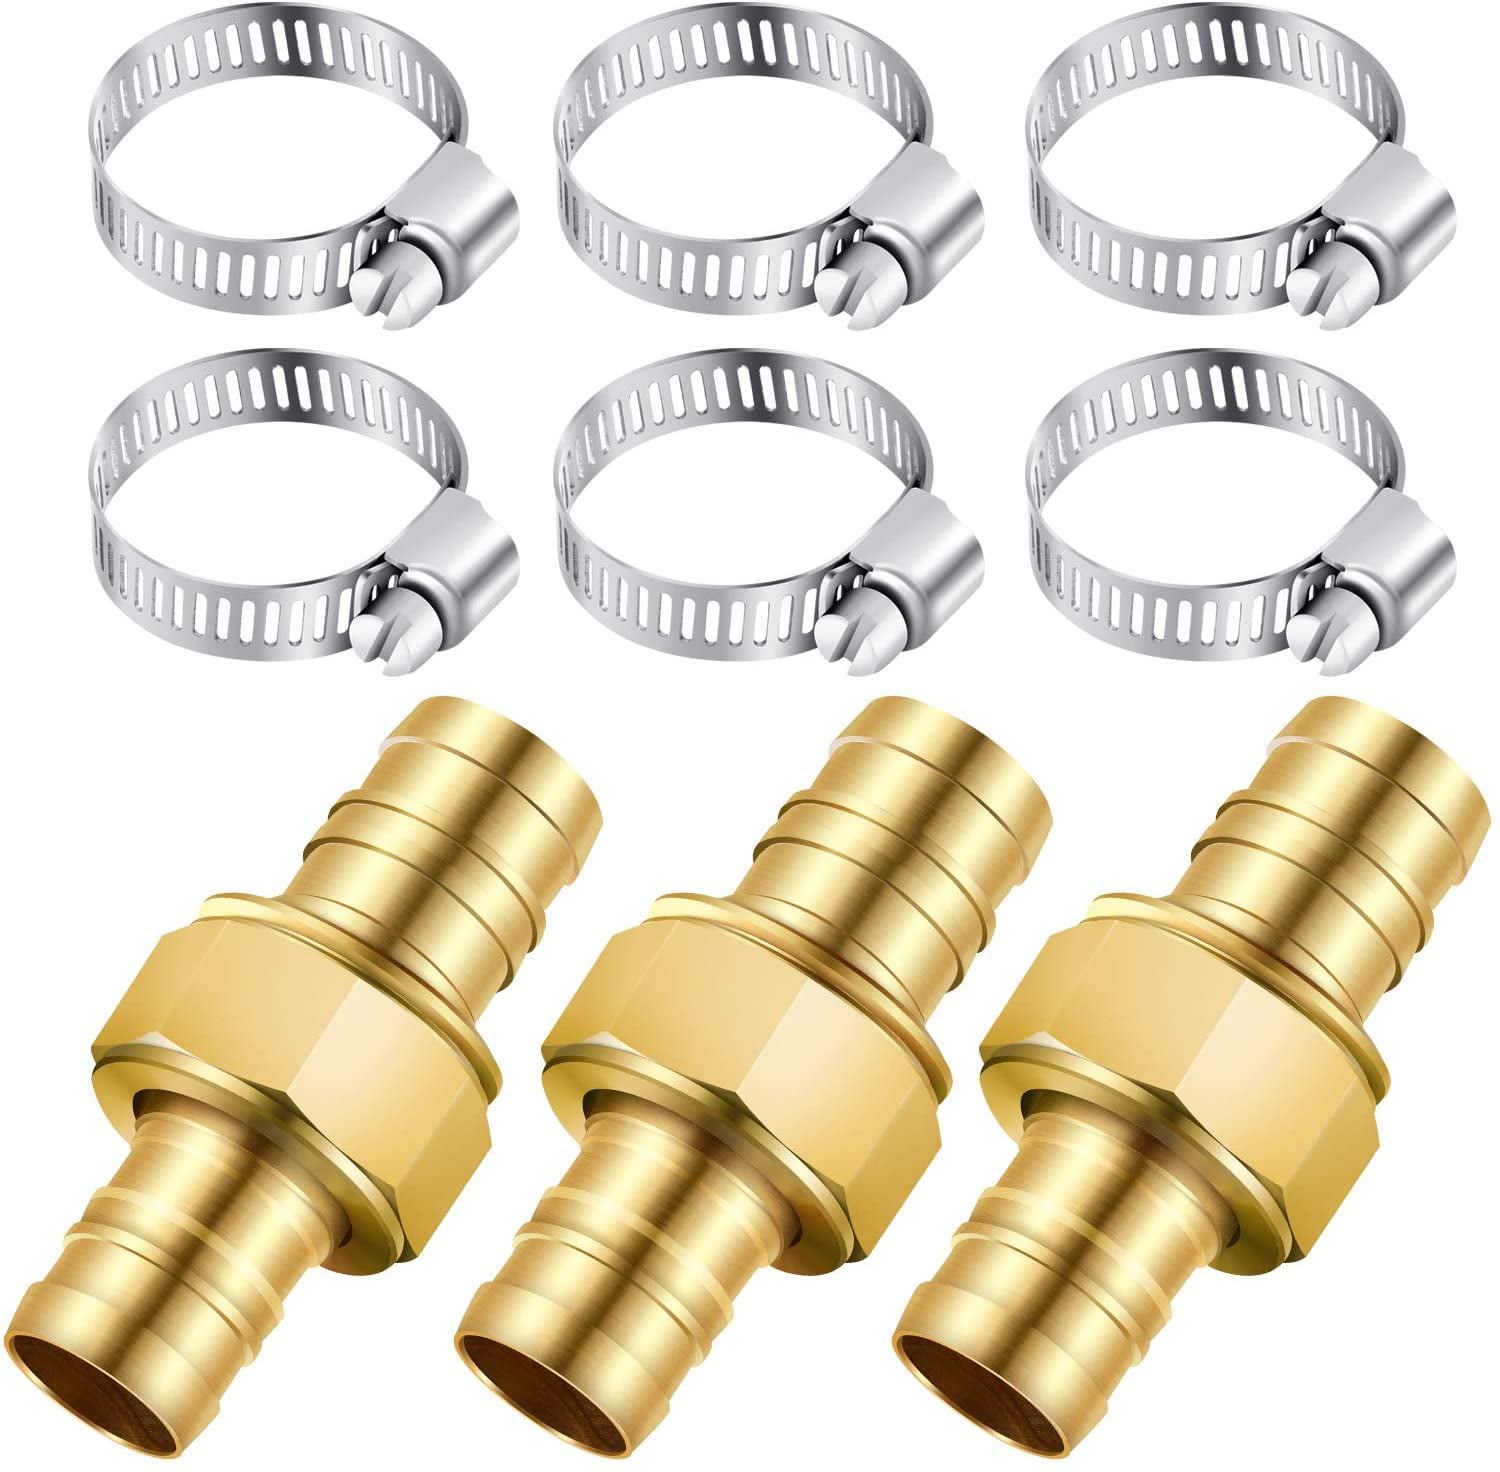 3 Sets 5/8 Garden Hose Mender Male Female End Repair Connector Stainless 